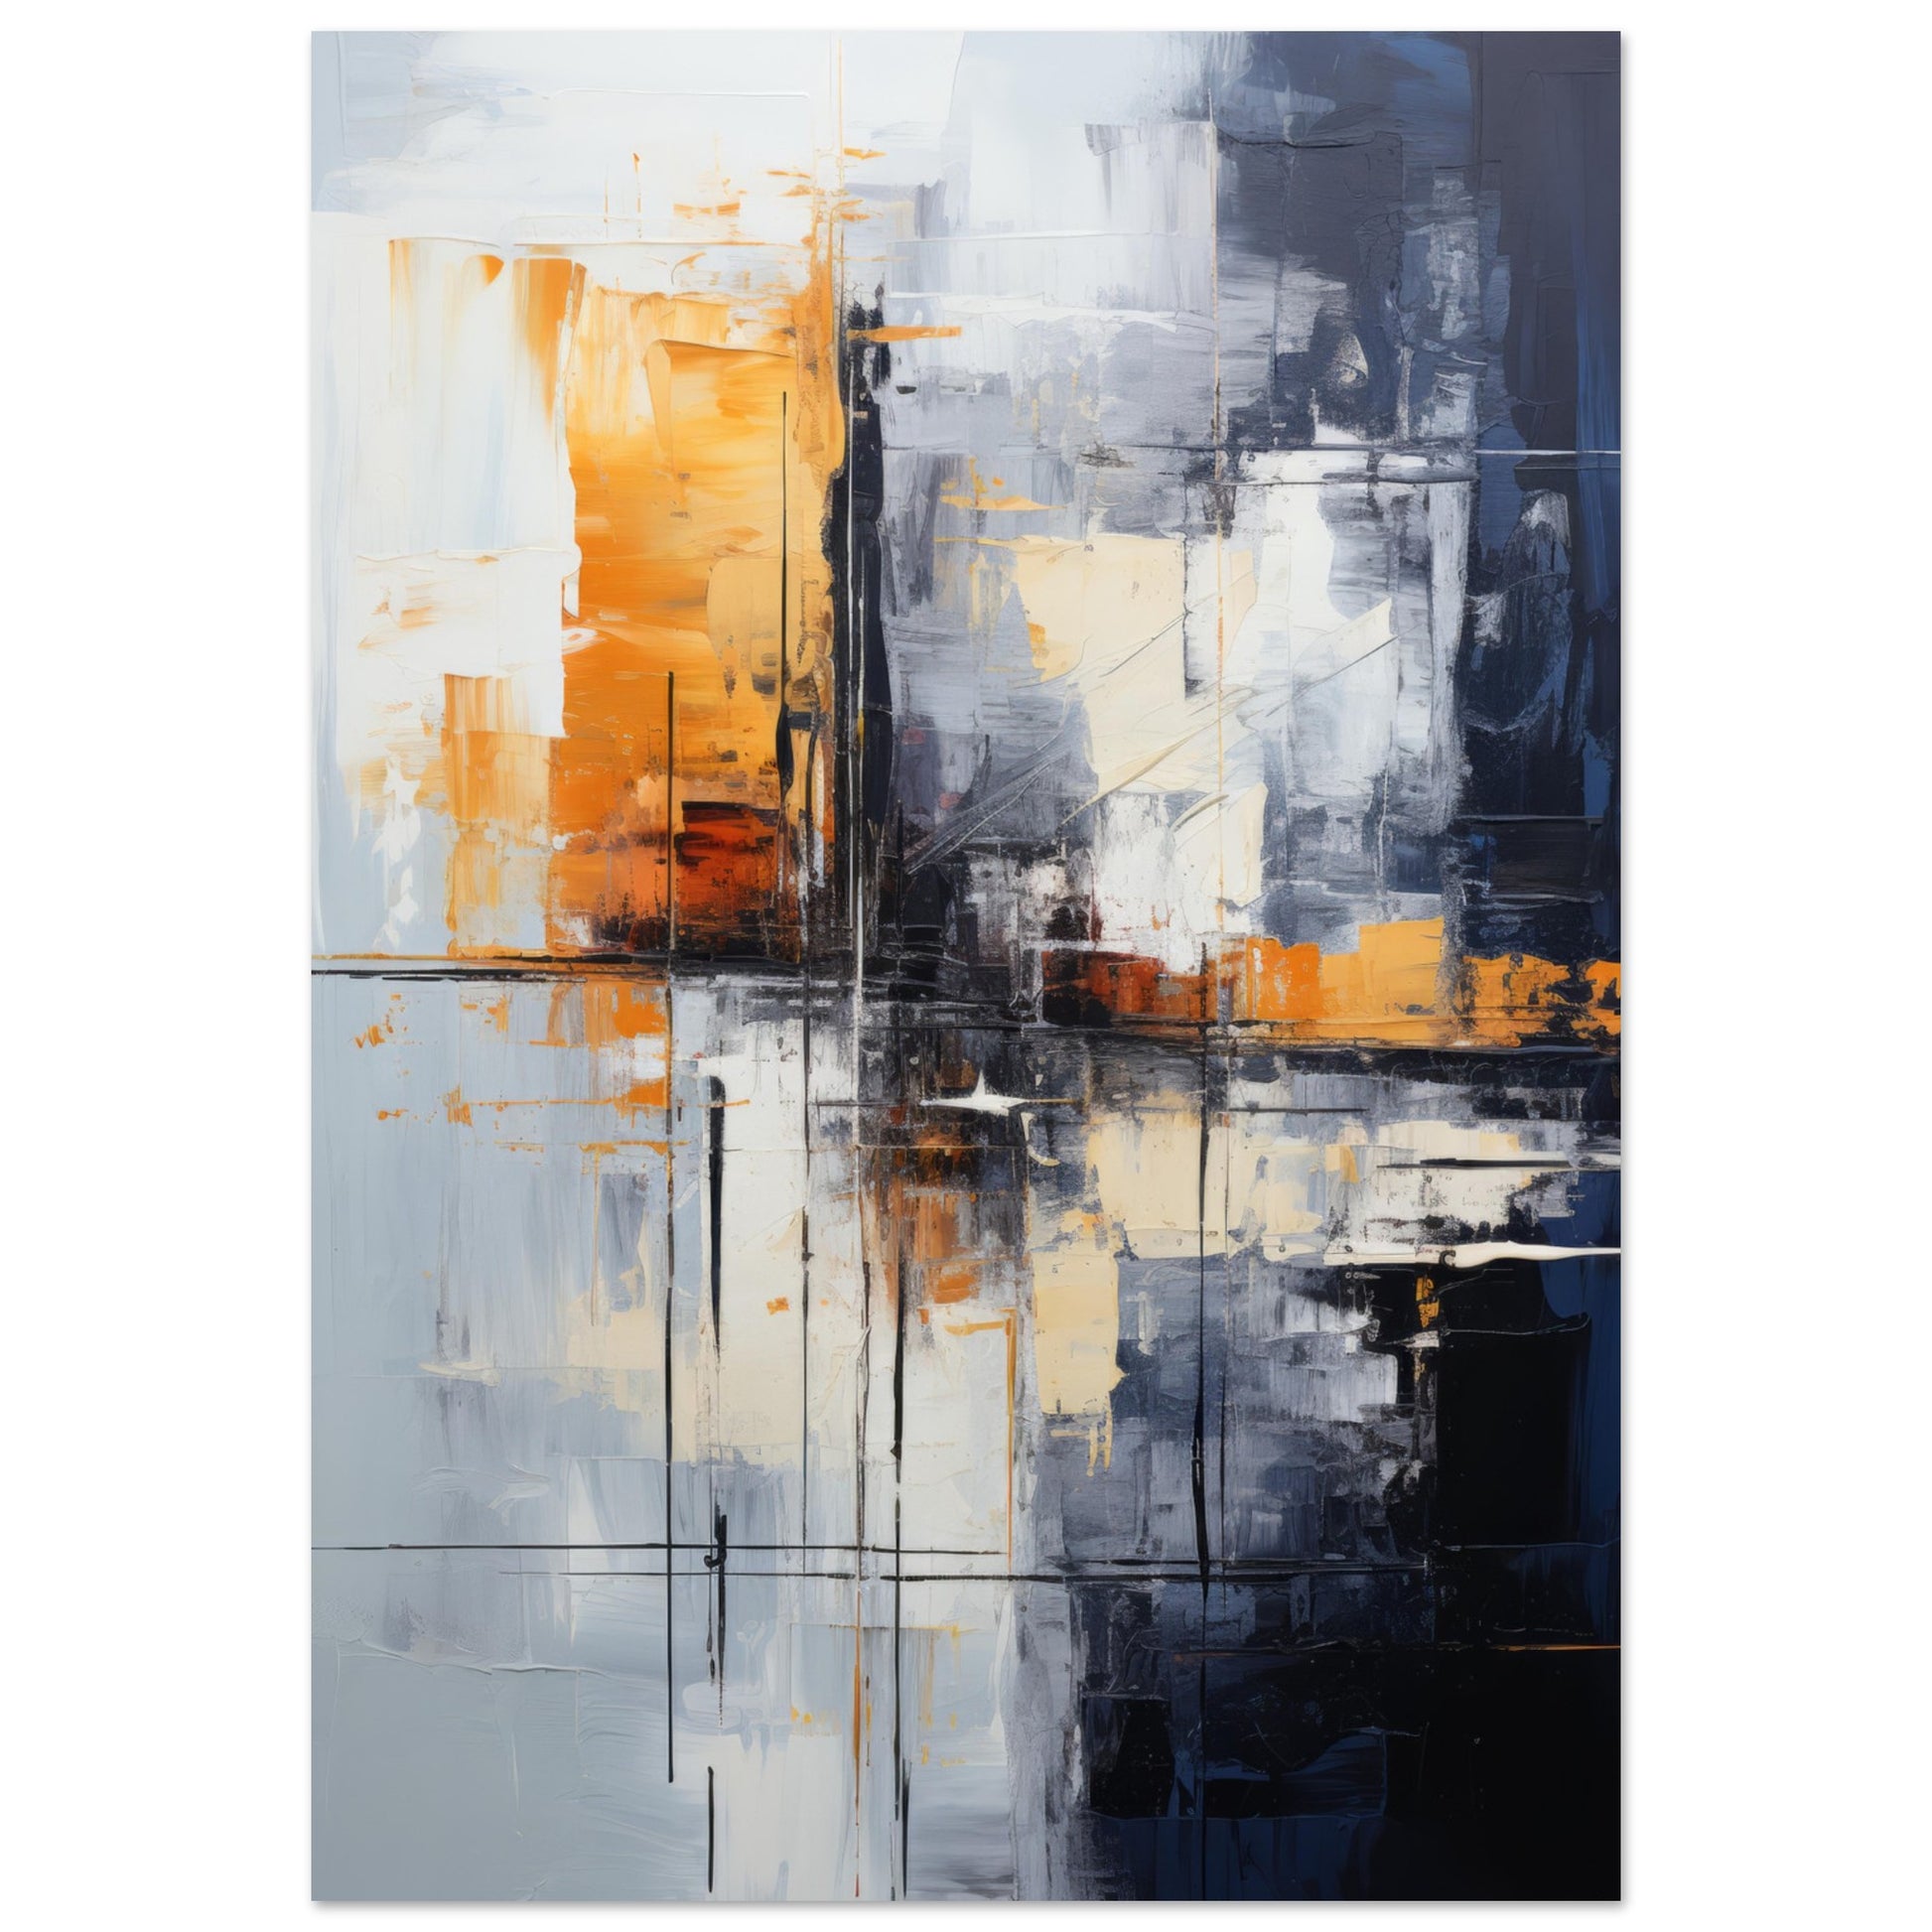 An abstract modern art print titled "Shot Shot" in black and white with striking orange accents, symbolizing moments of passion and clarity in a monochrome world. Ideal for contemporary wall decor.